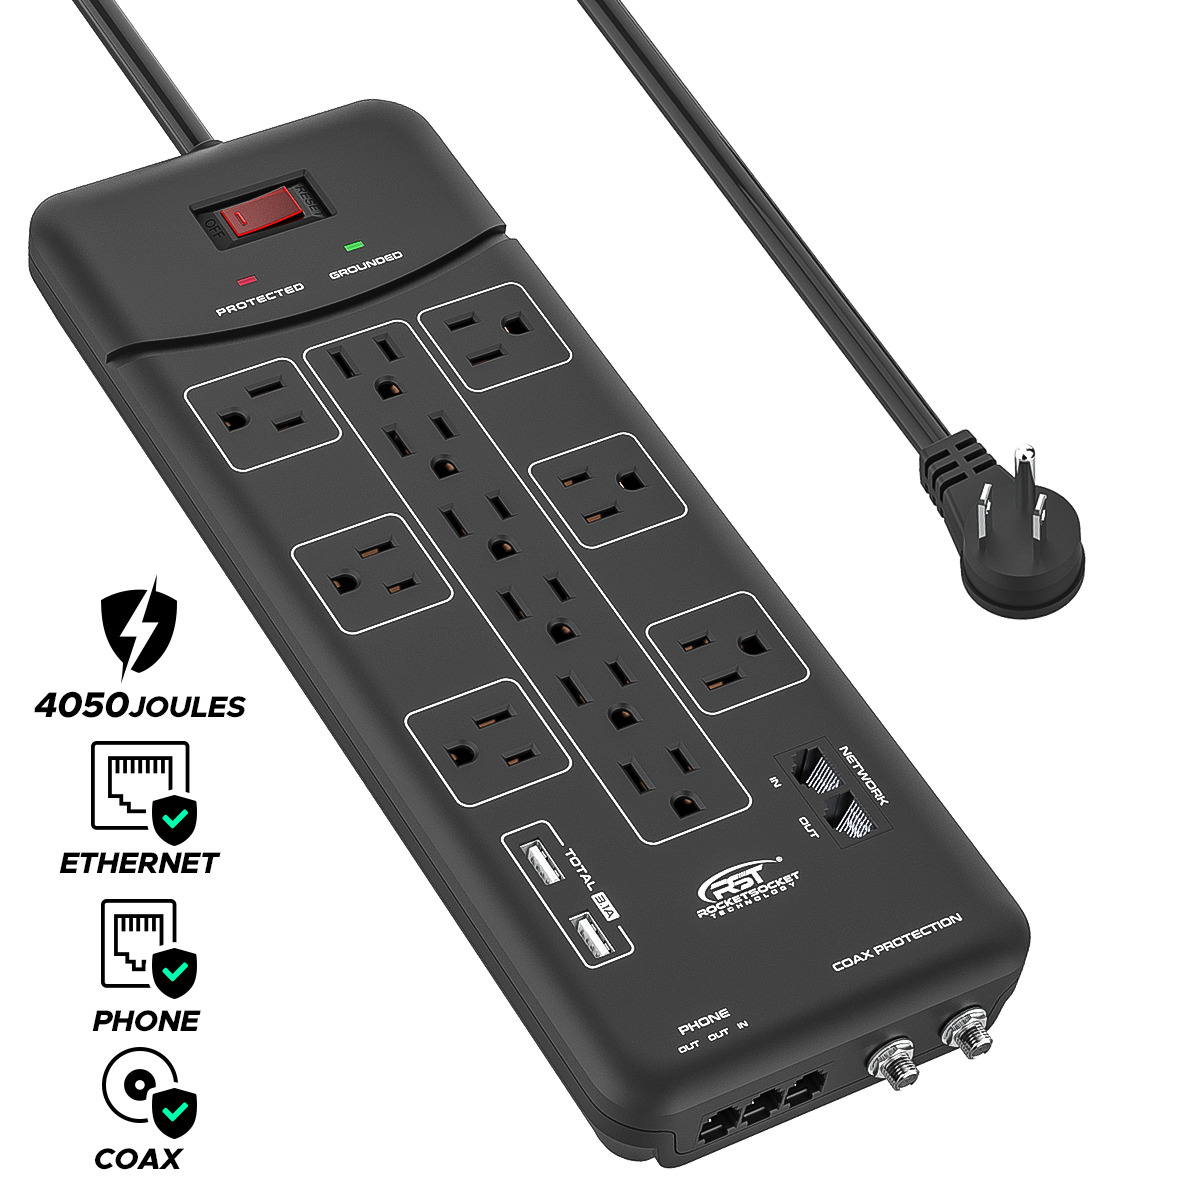 CRST Surge Protector Power Strip 4050J, with USB, Ethernet, Coaxial, Flat Plug